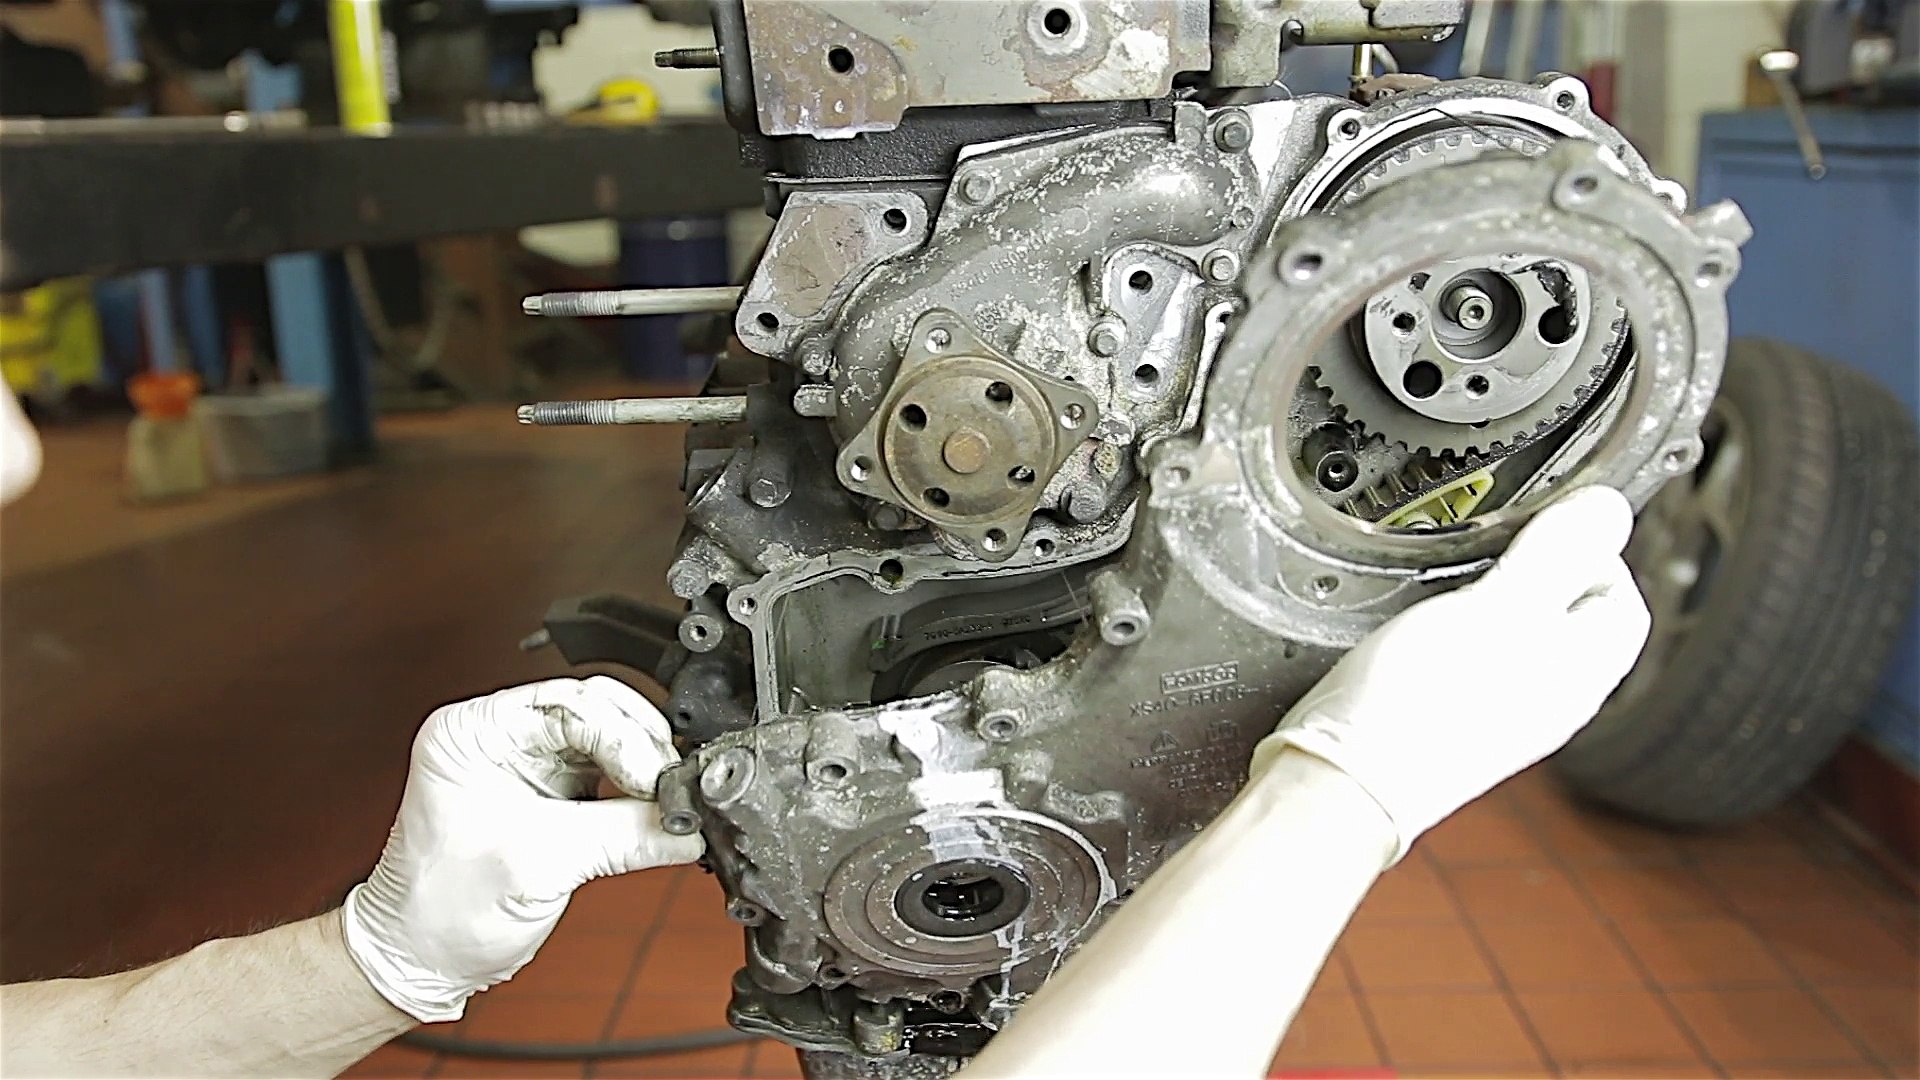 ford mondeo1.8tdci wet timing belt replacement - video Dailymotion